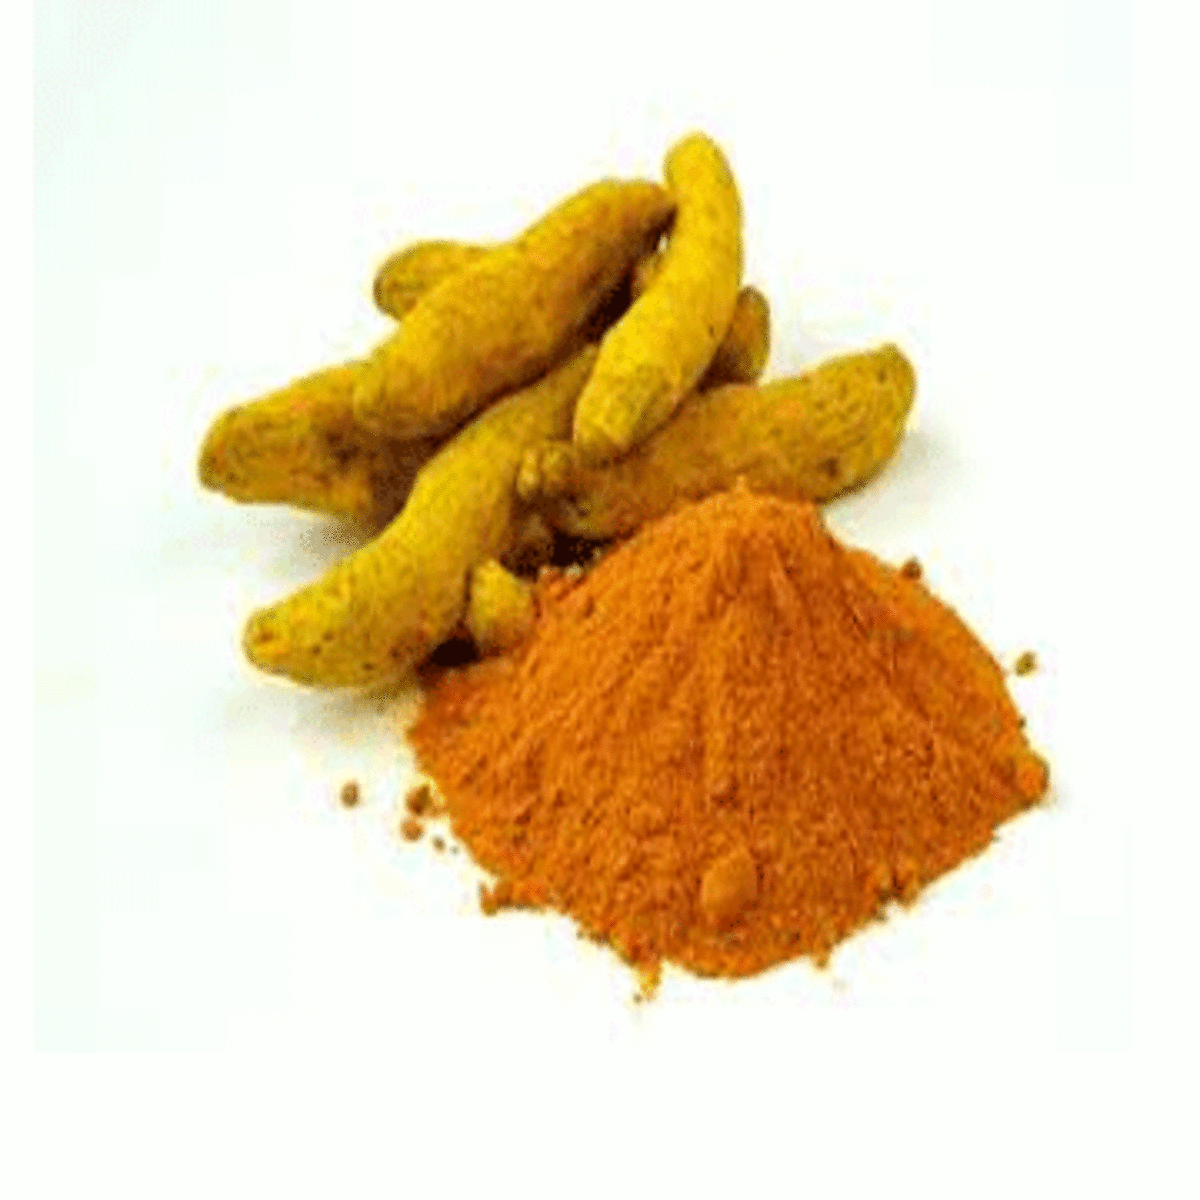 Turmeric and it’s powder, is commonly used in Indian cooking 